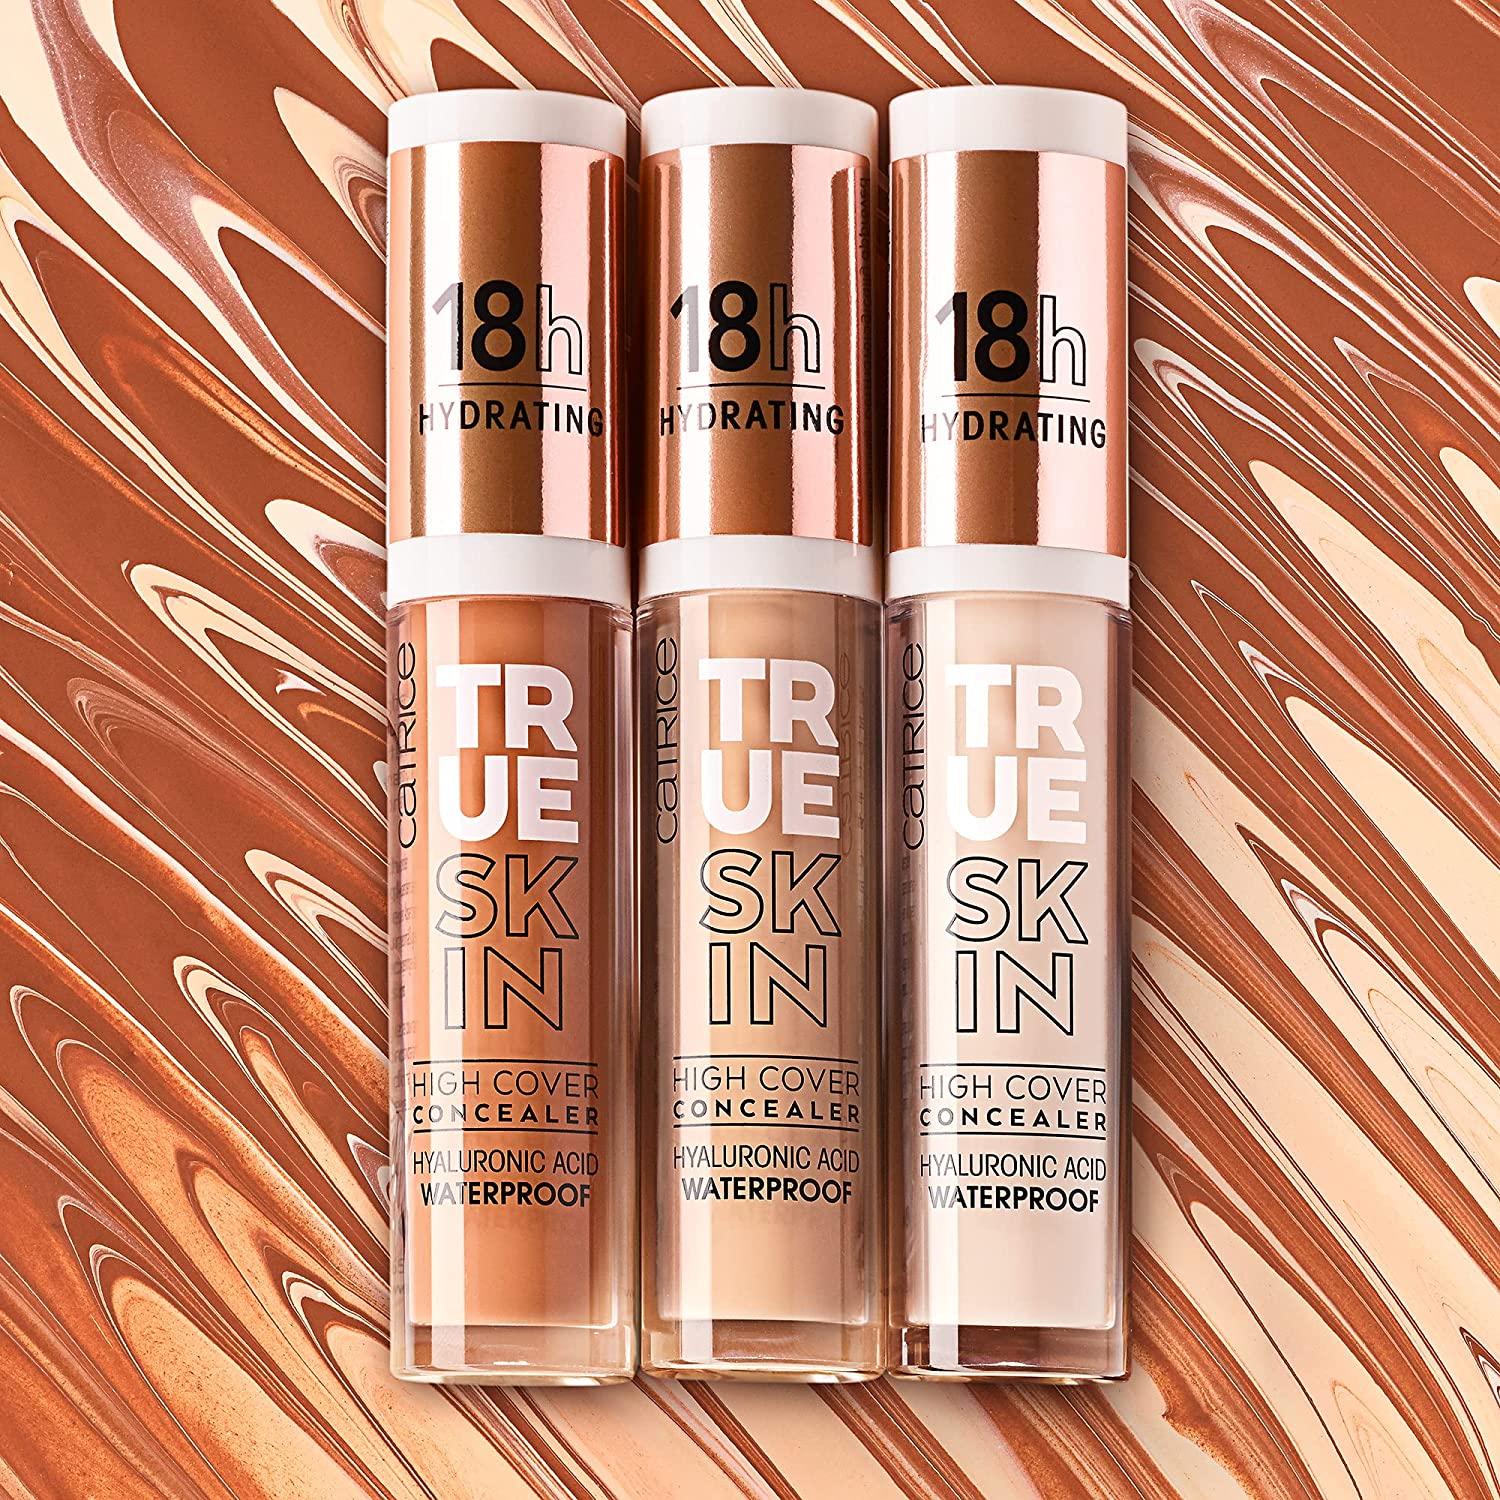 Catrice | True Skin Hyaluronic High to Hours Acid Vegan, | Free Up Soft Matte Lightweight Lasts Concealer Look Swan) | (001 | 18 Cover for & Contains Free, Neutral Cruelty Waterproof | & Gluten